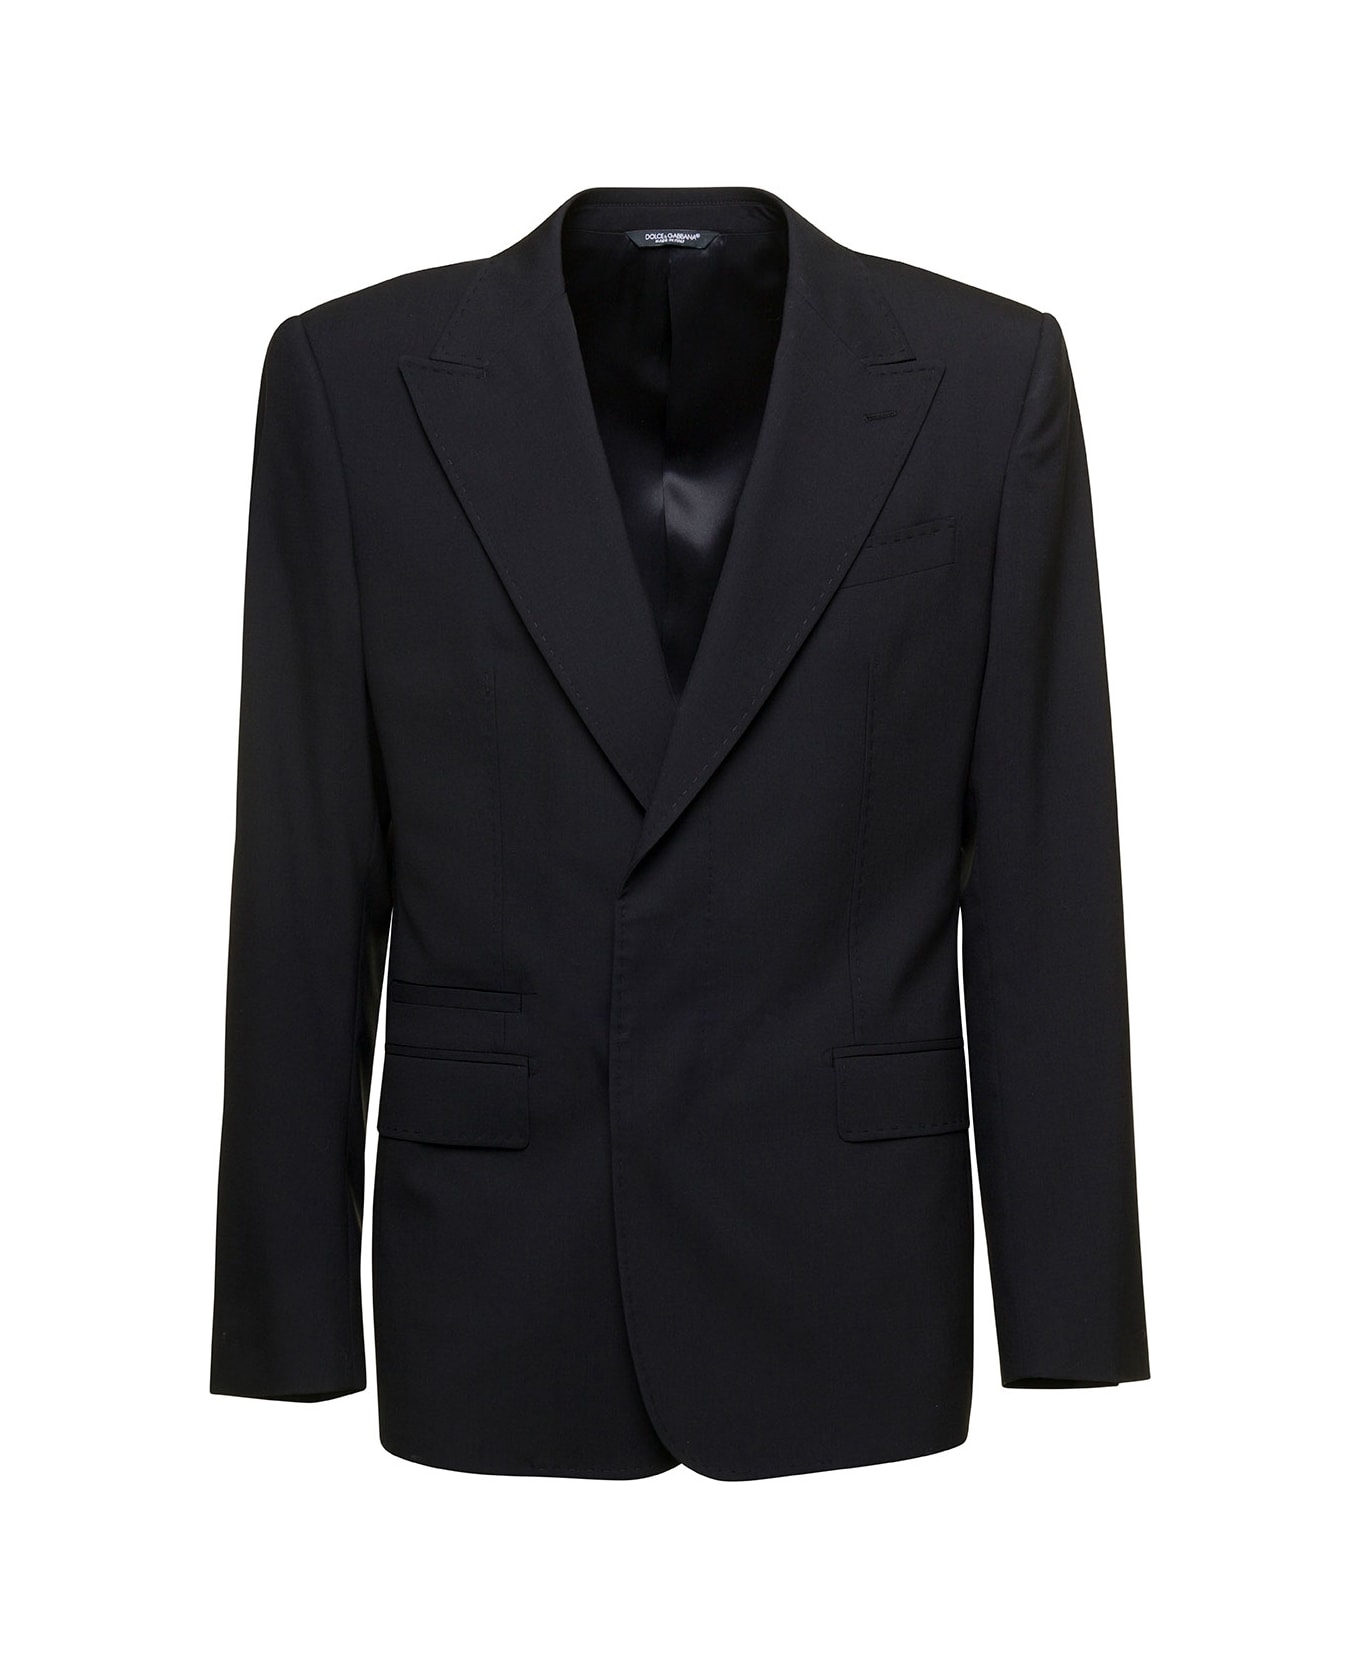 Dolce & Gabbana 'new Sicilia' Black Single-breasted Jacket With Concelaed Fastening In Stretch Wool Man - Black ブレザー